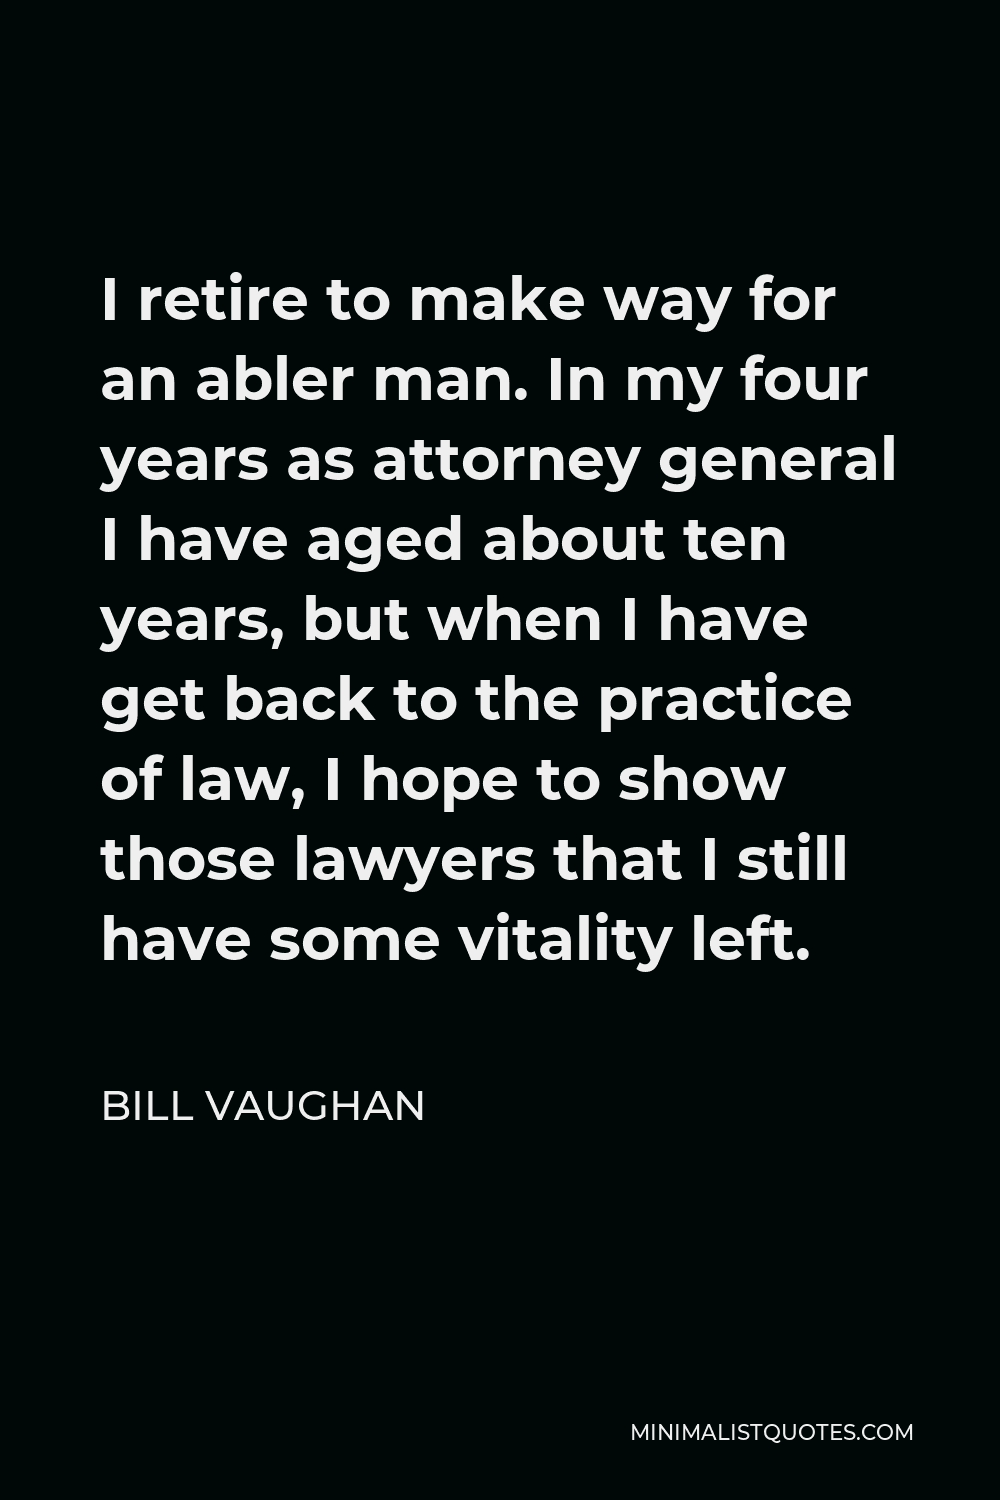 Bill Vaughan Quote - I retire to make way for an abler man. In my four years as attorney general I have aged about ten years, but when I have get back to the practice of law, I hope to show those lawyers that I still have some vitality left.